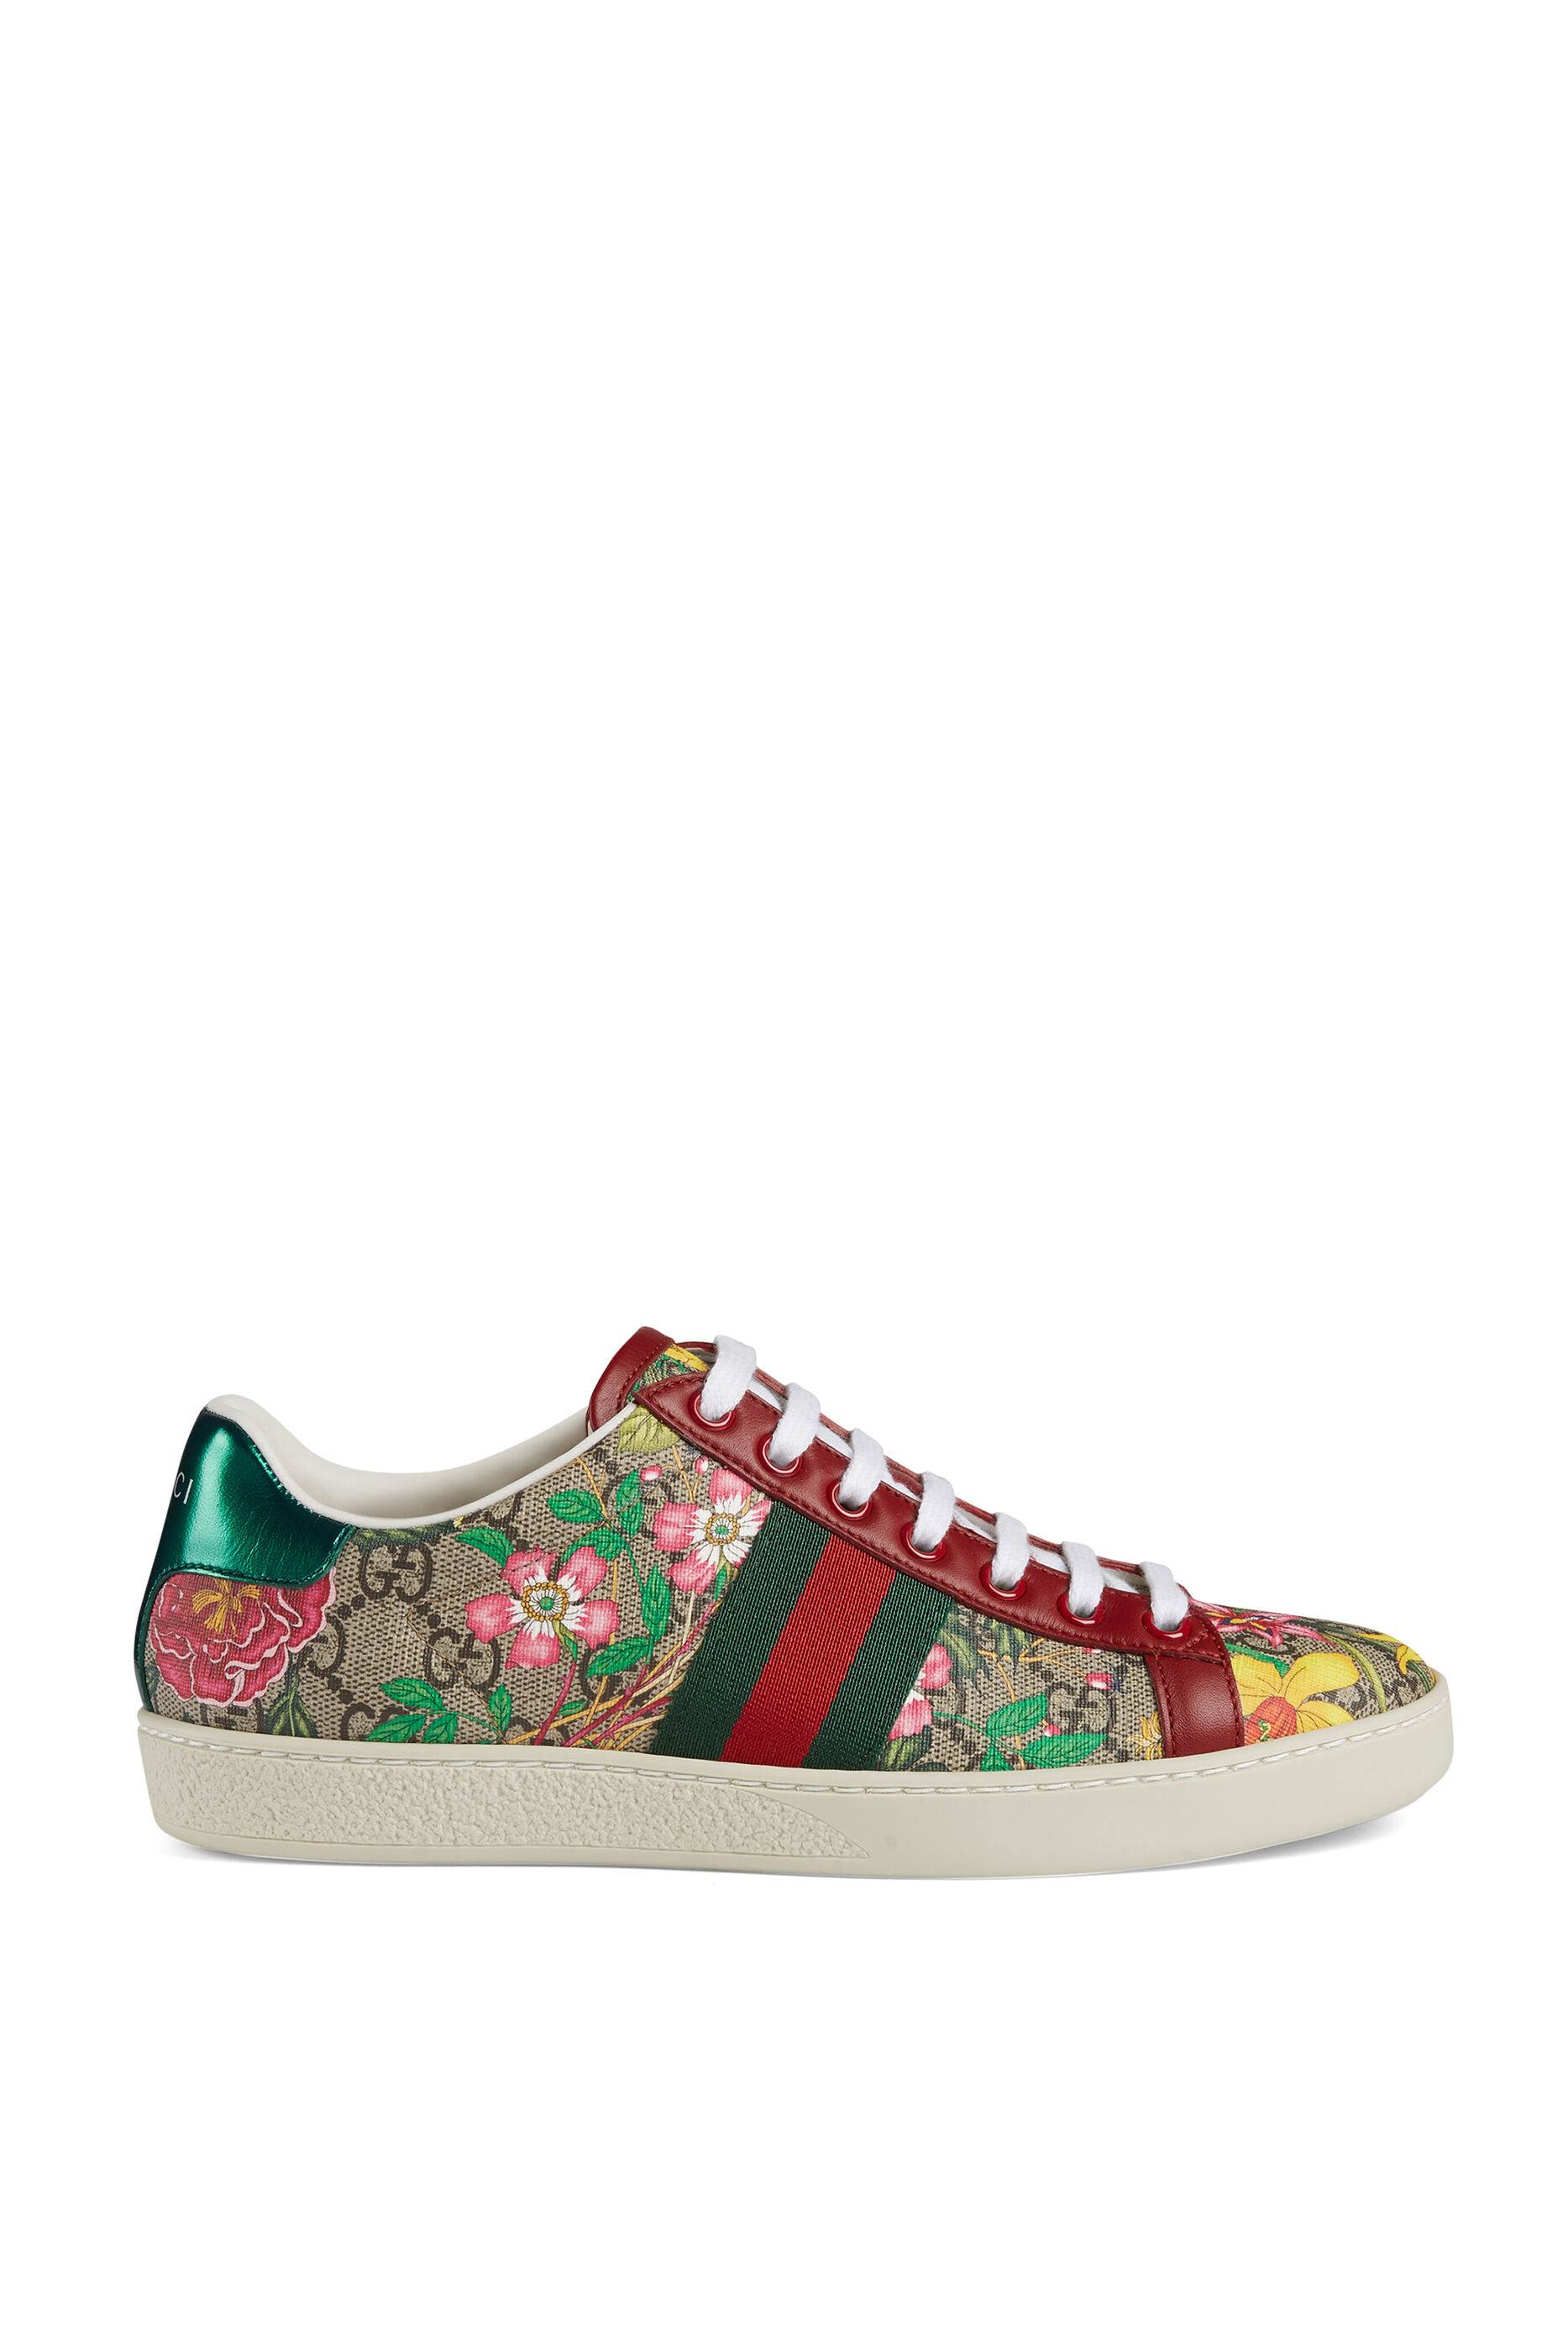 gucci floral sneaker